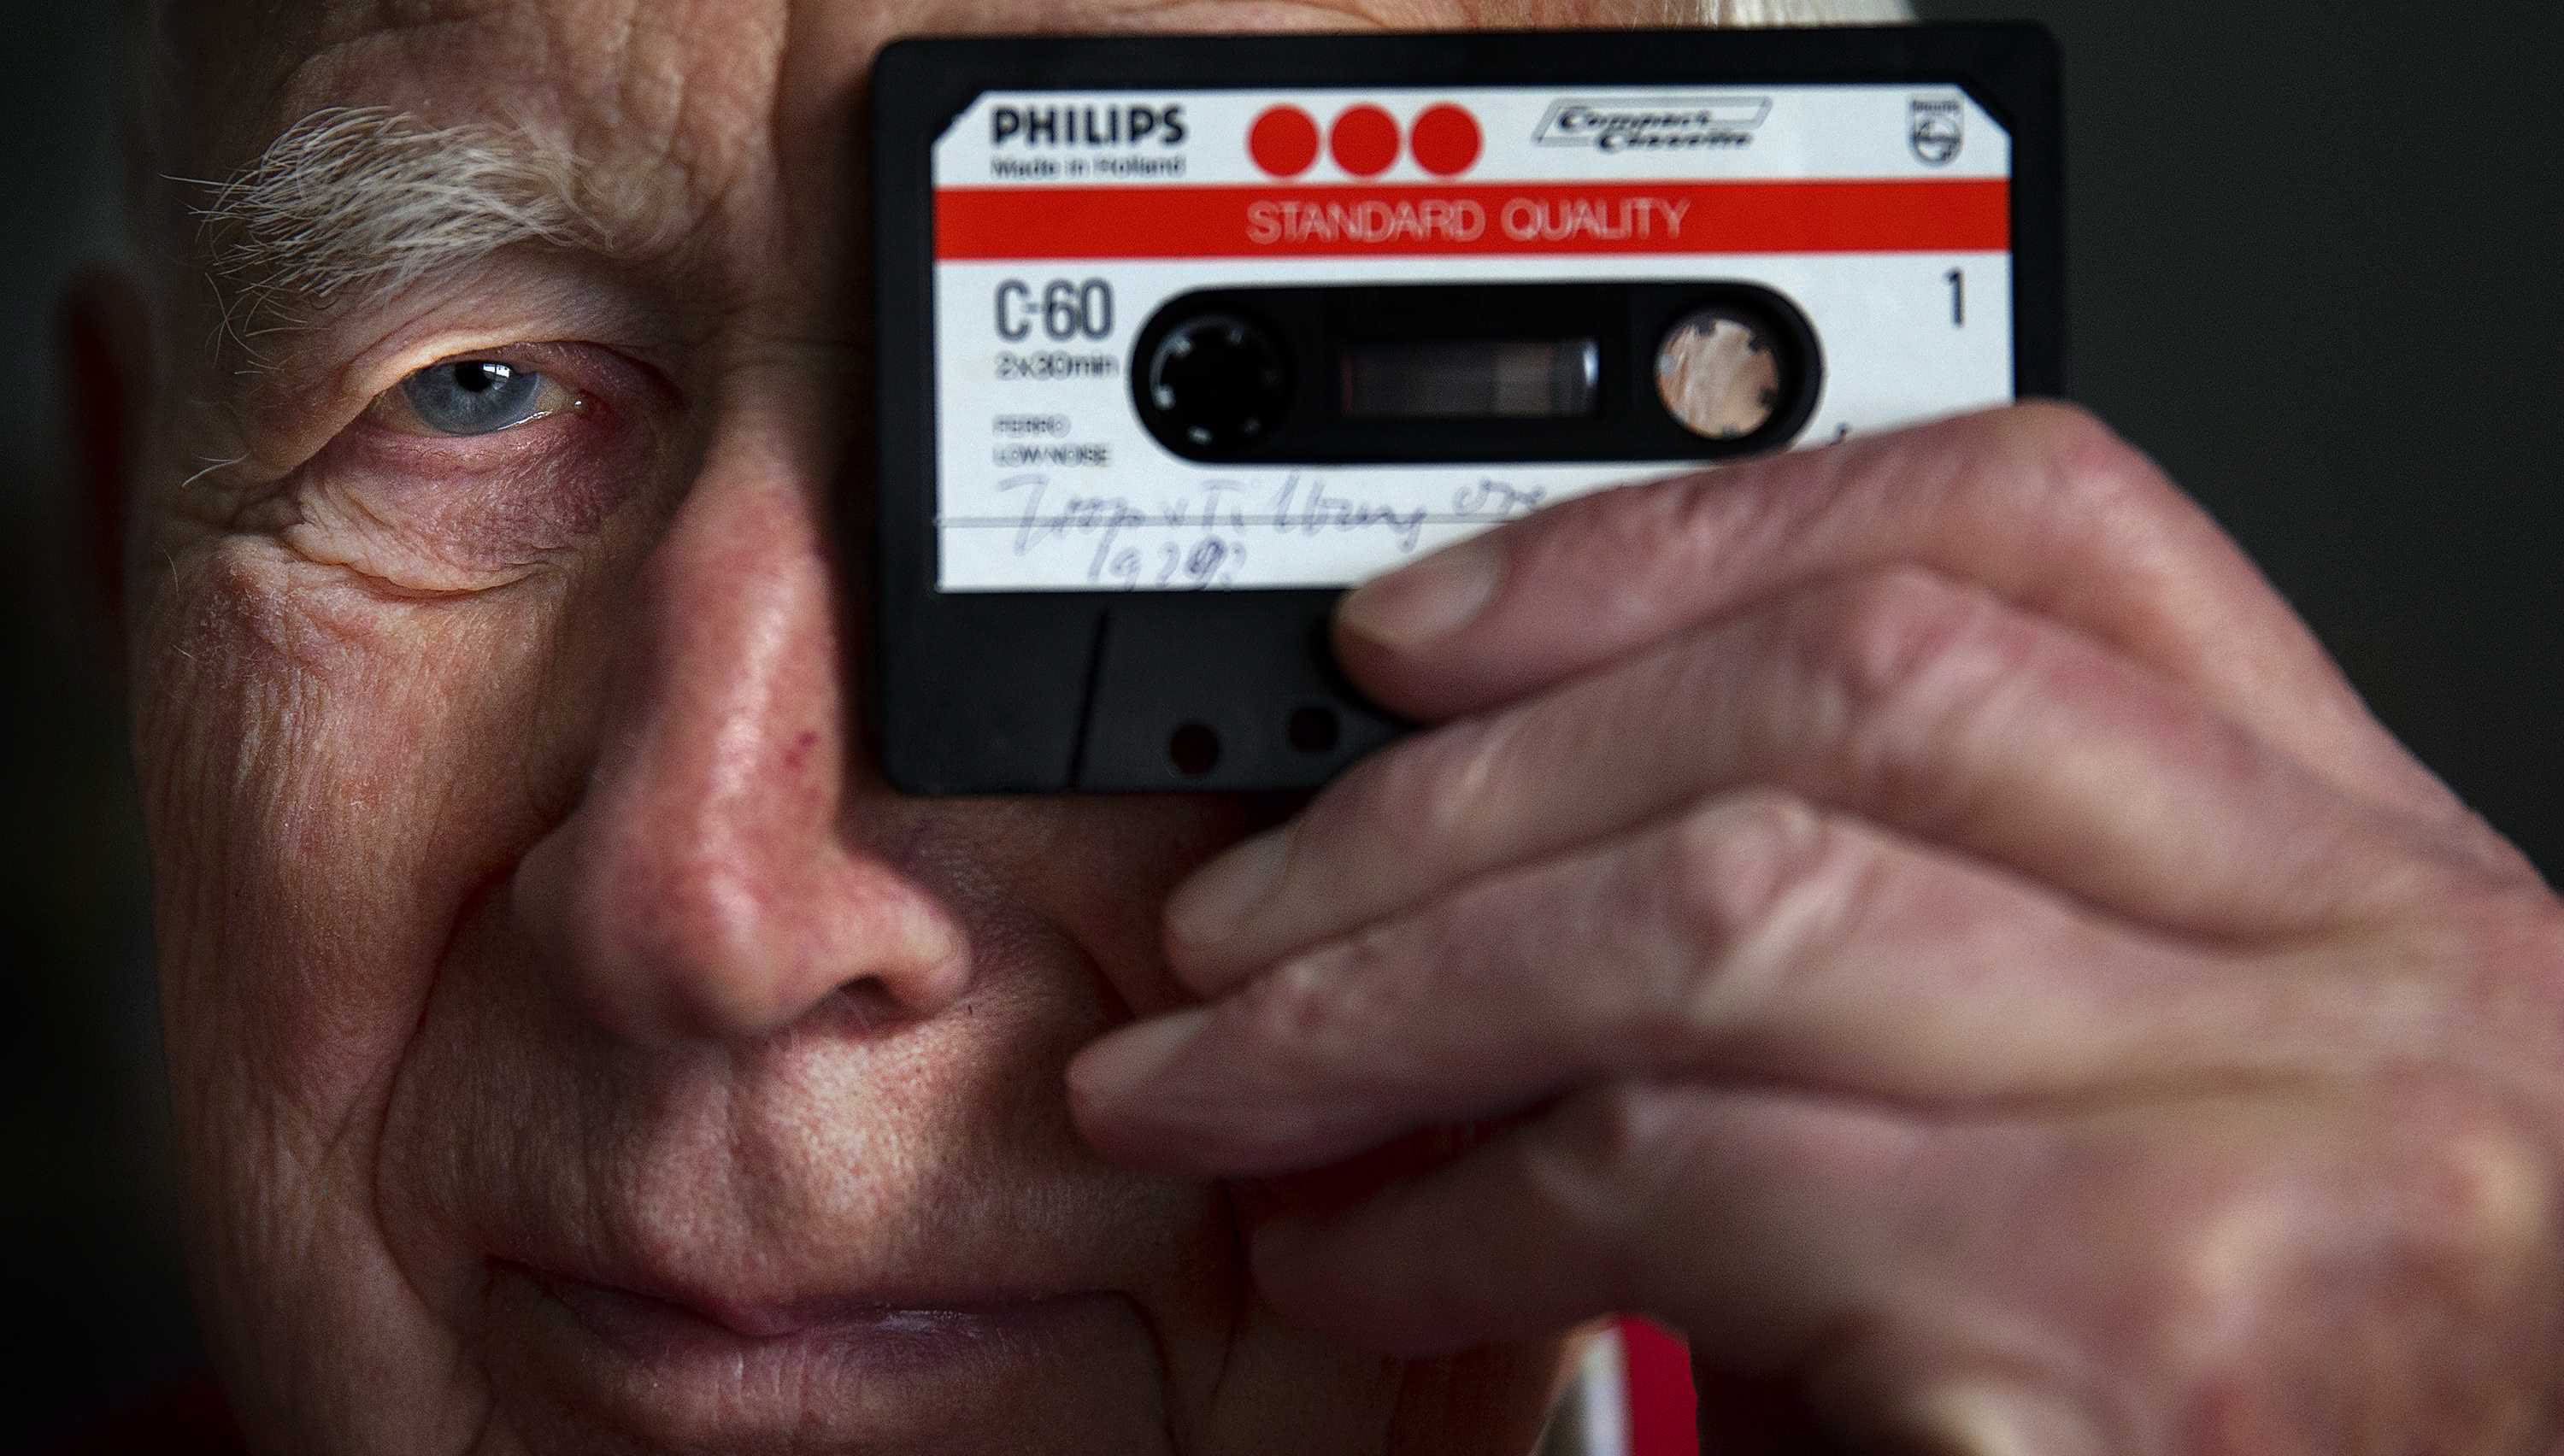 New cassette tape could hold 47 million songs